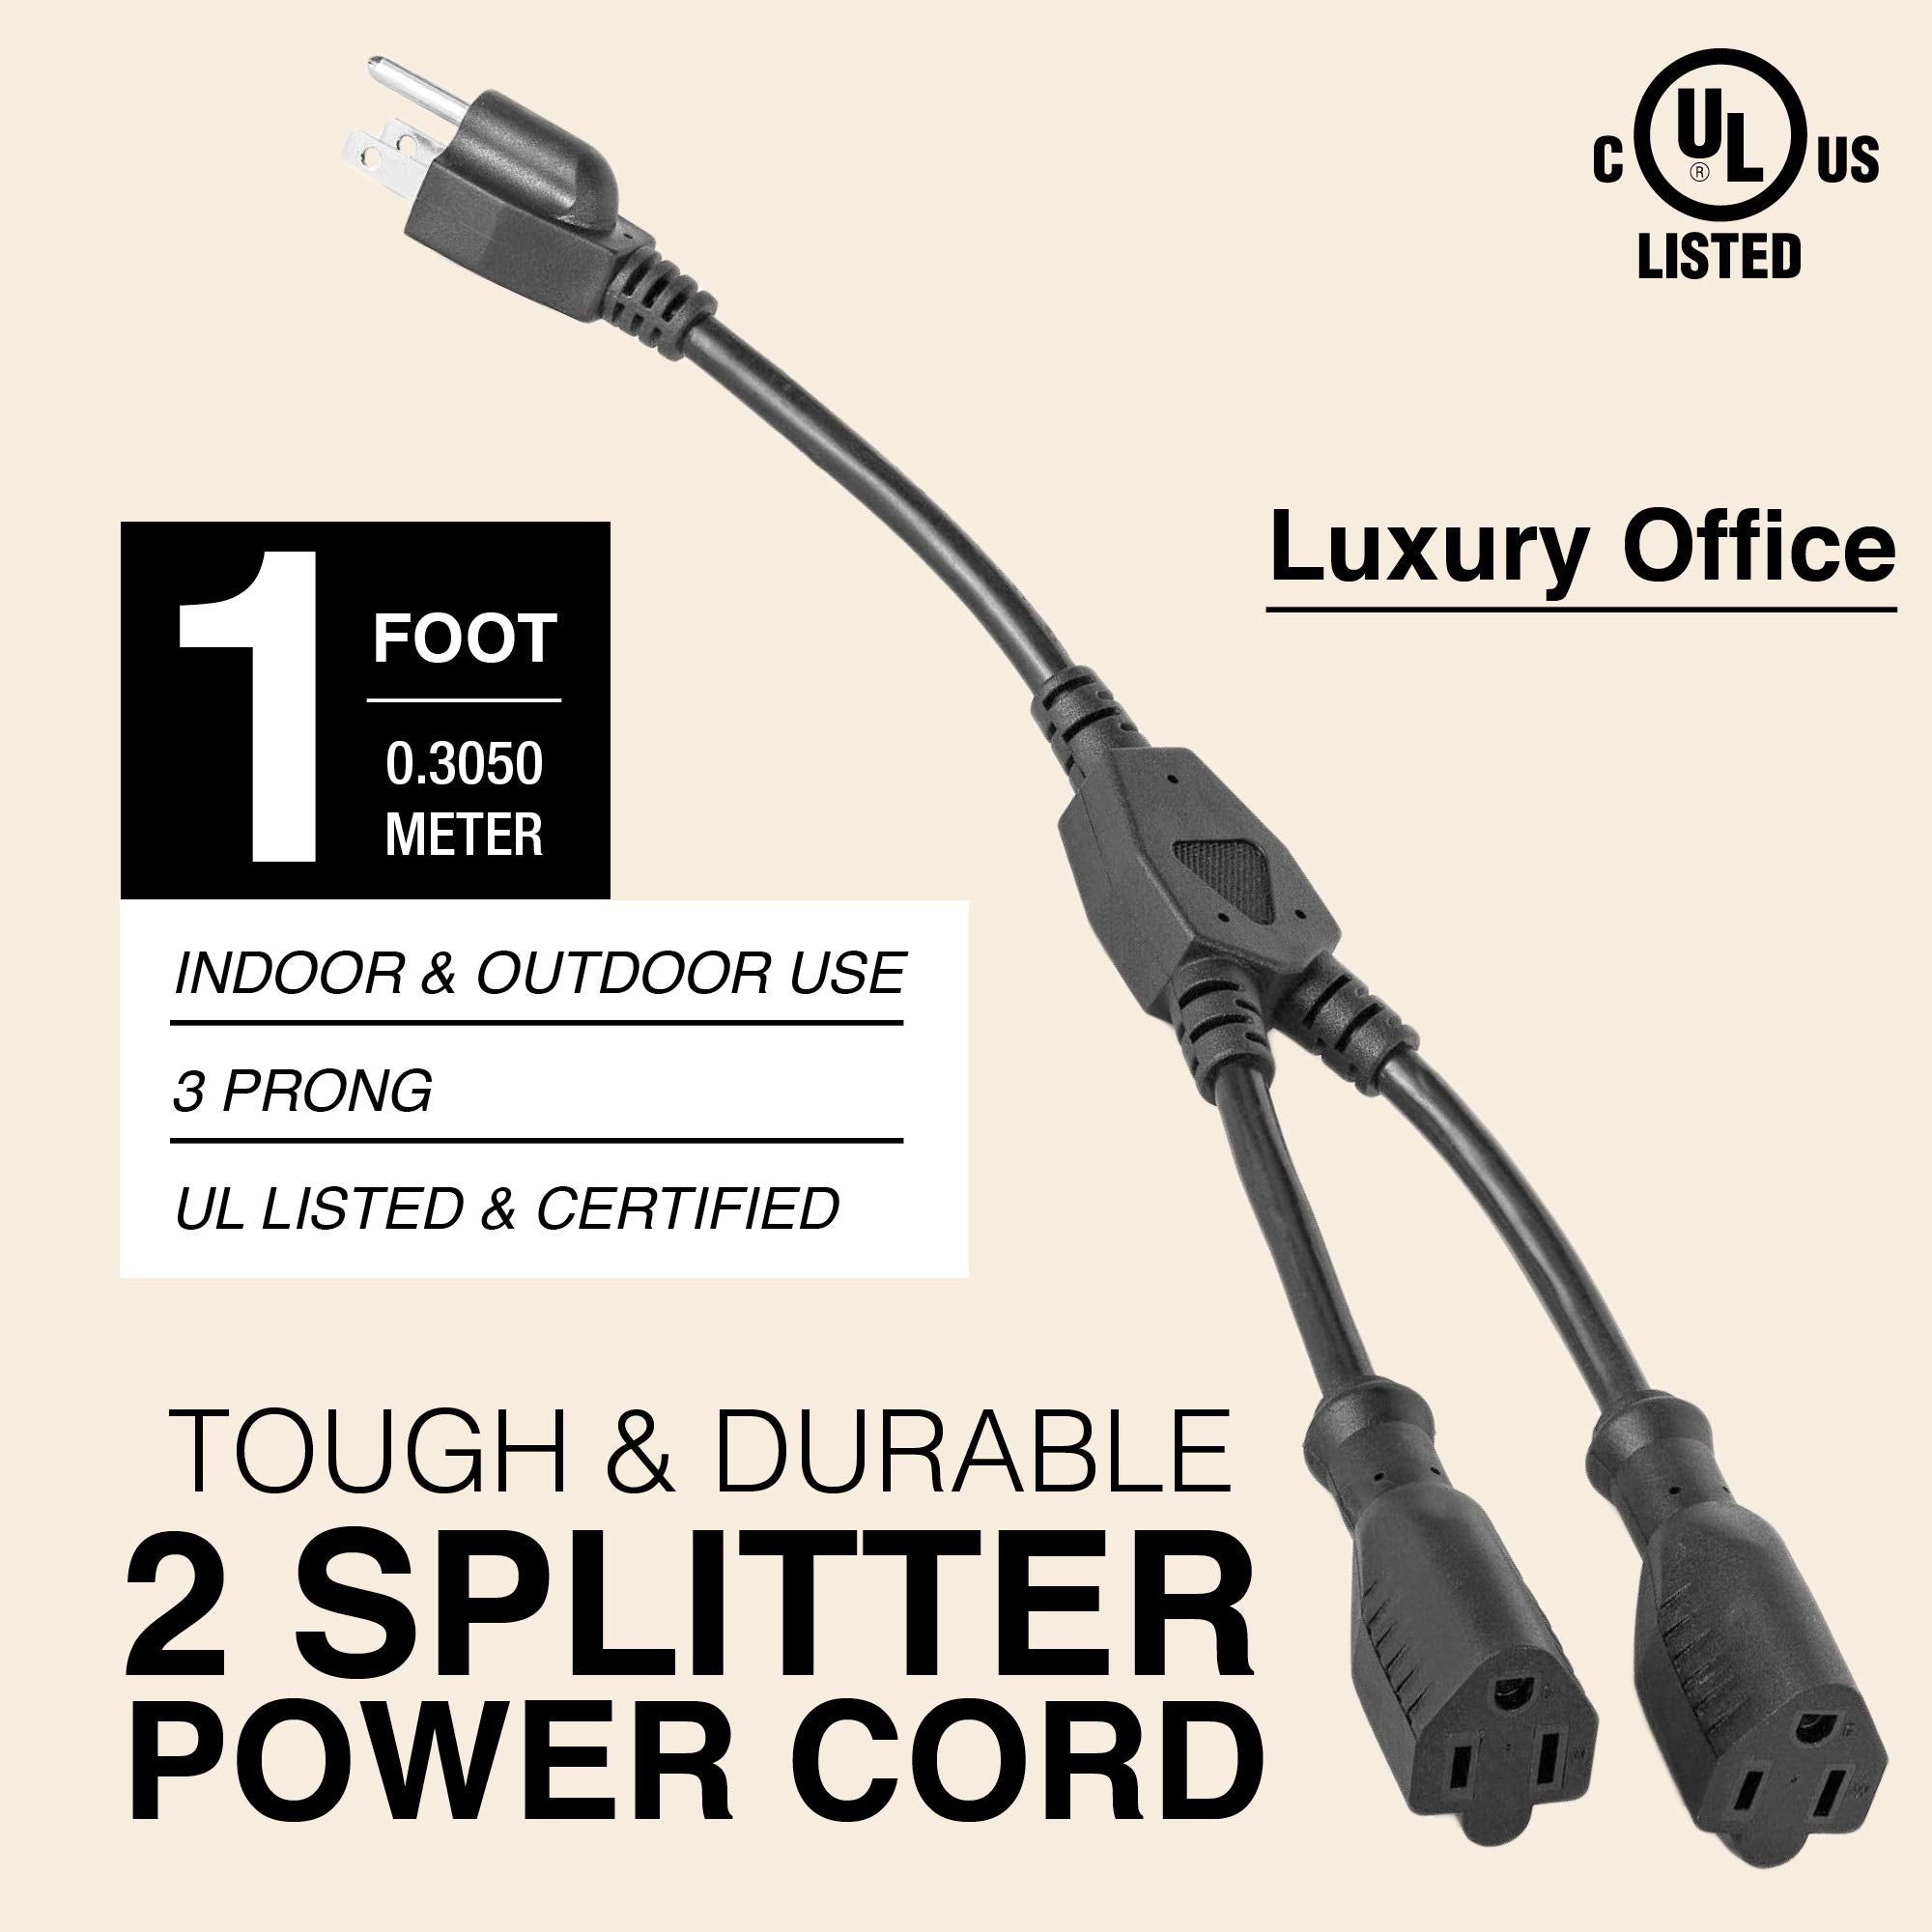 2 Way Power Splitter and 1' Extension Cord - 1 to 2 Cable Strip with 3 Pronged Outlet and Y Style Extension Cord – Black - SJT 16 AWG – by Luxury Office  - Like New